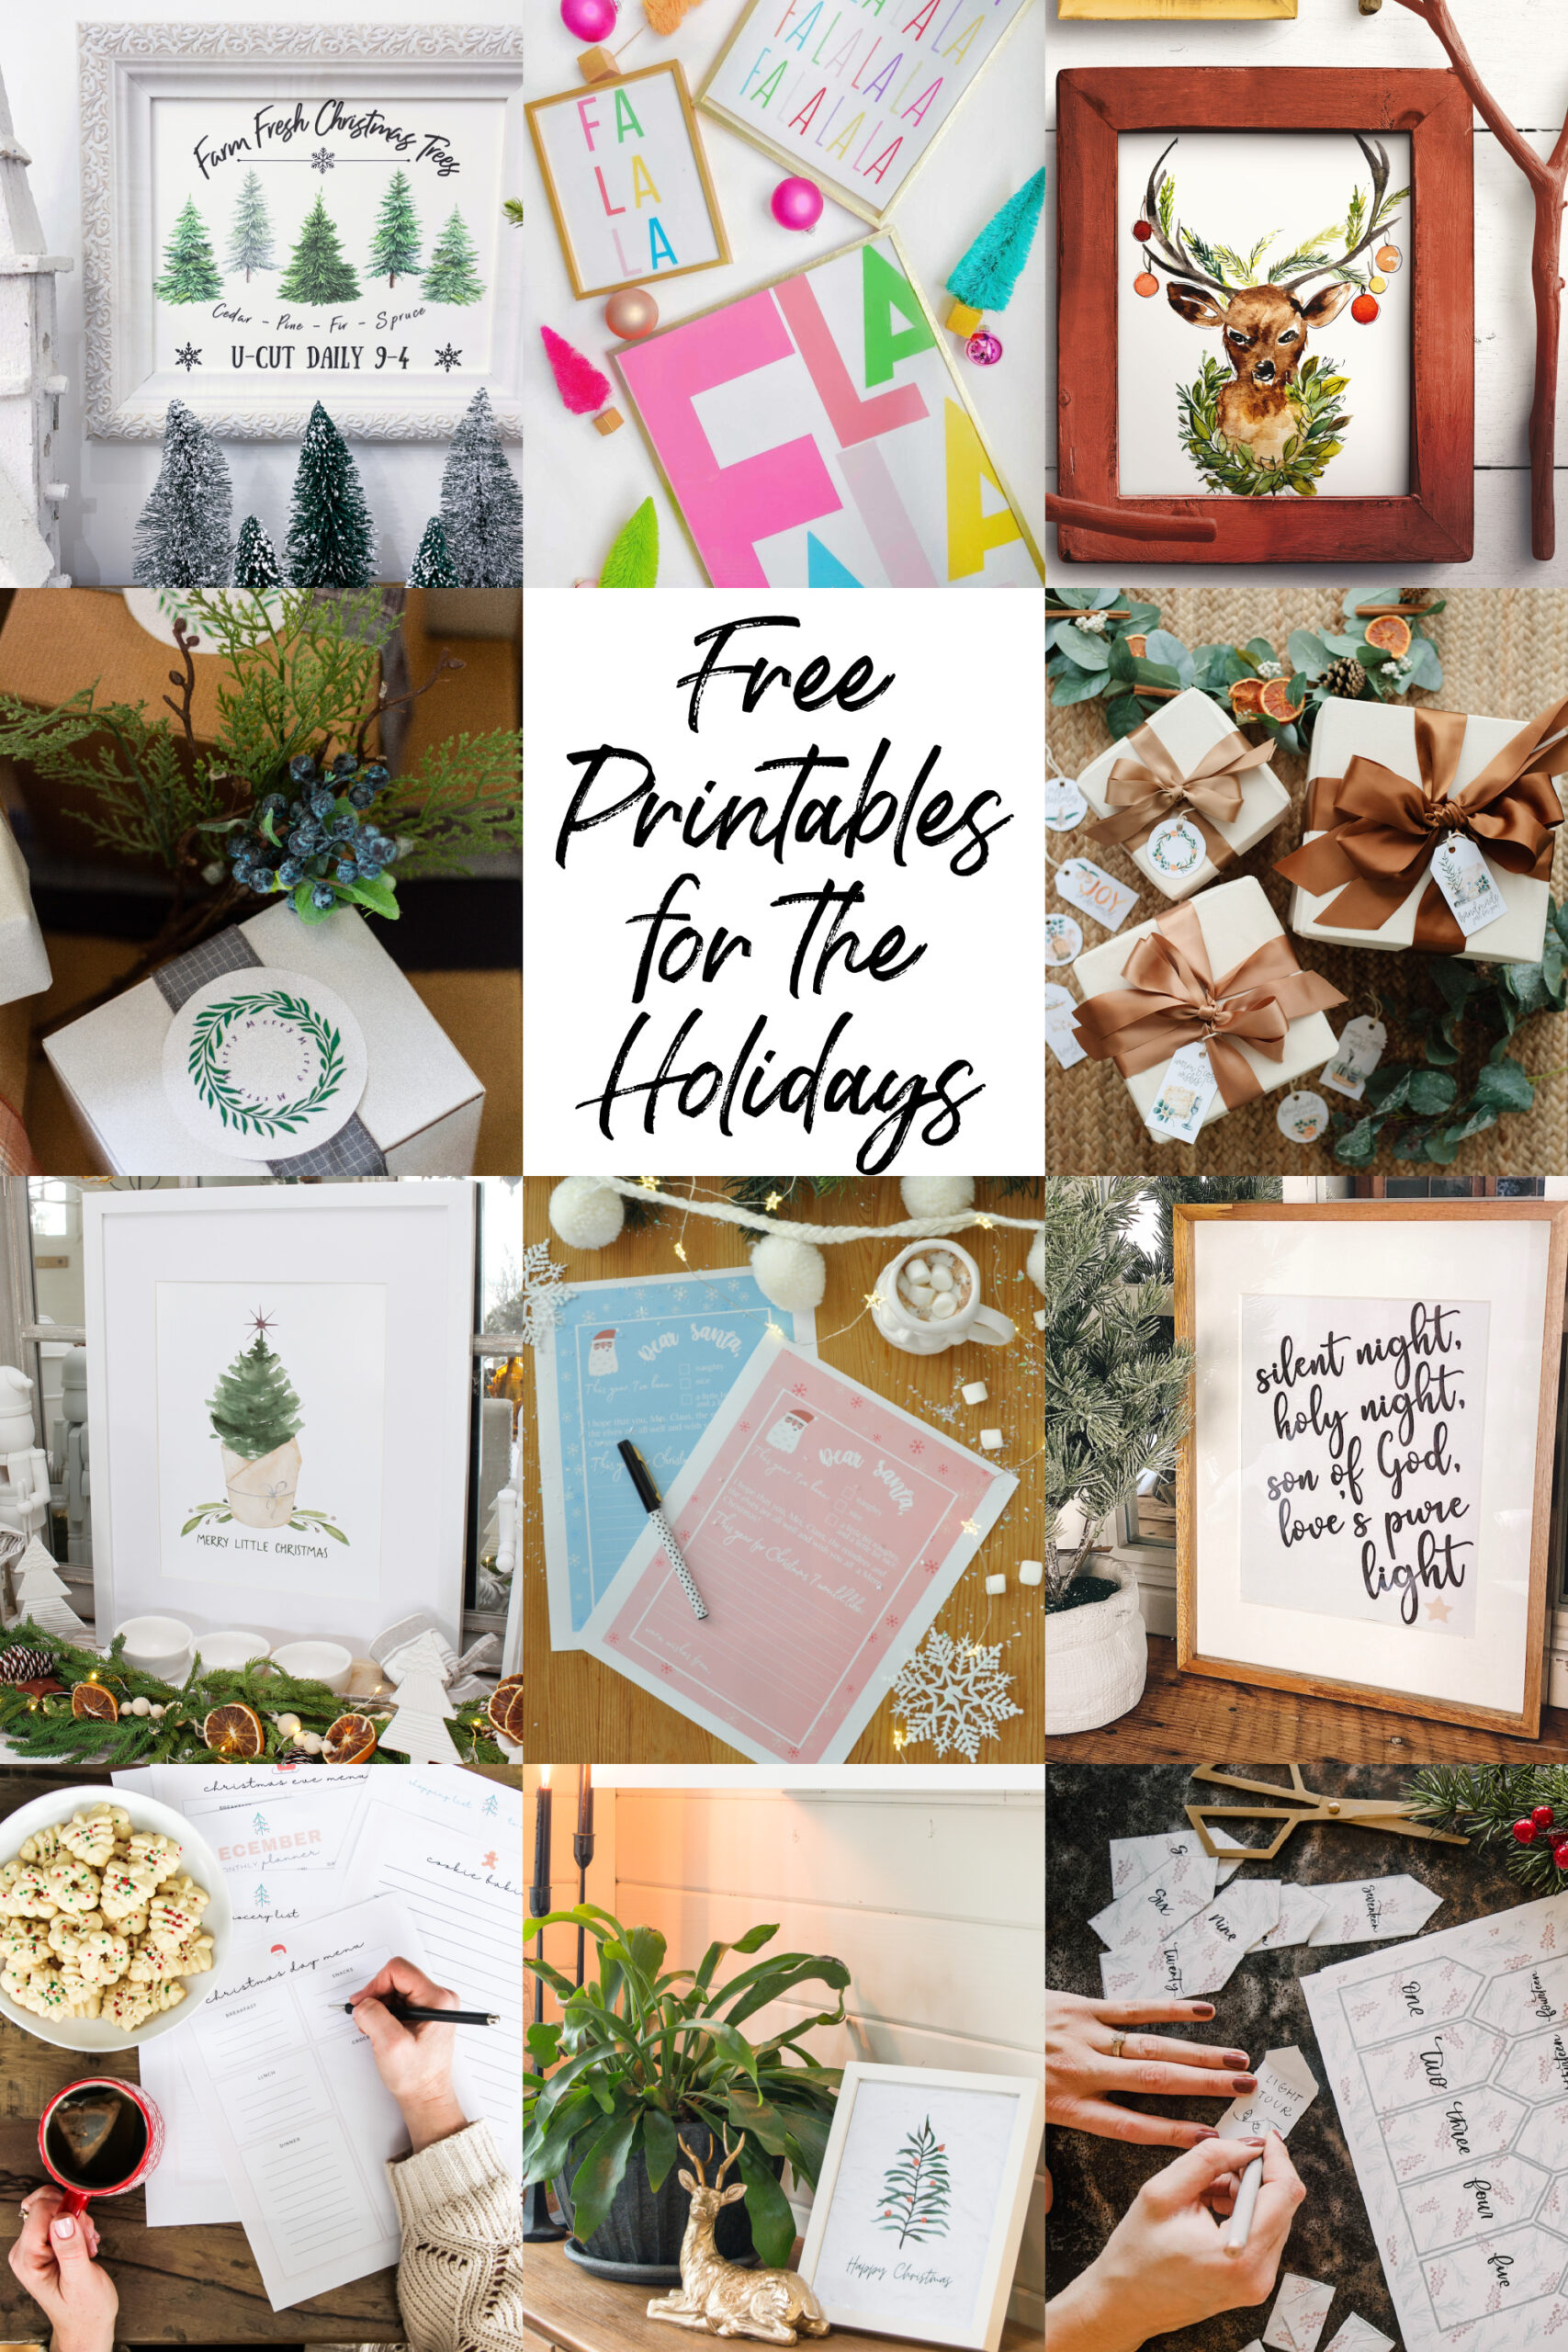 Free Printables For The Holidays poster.